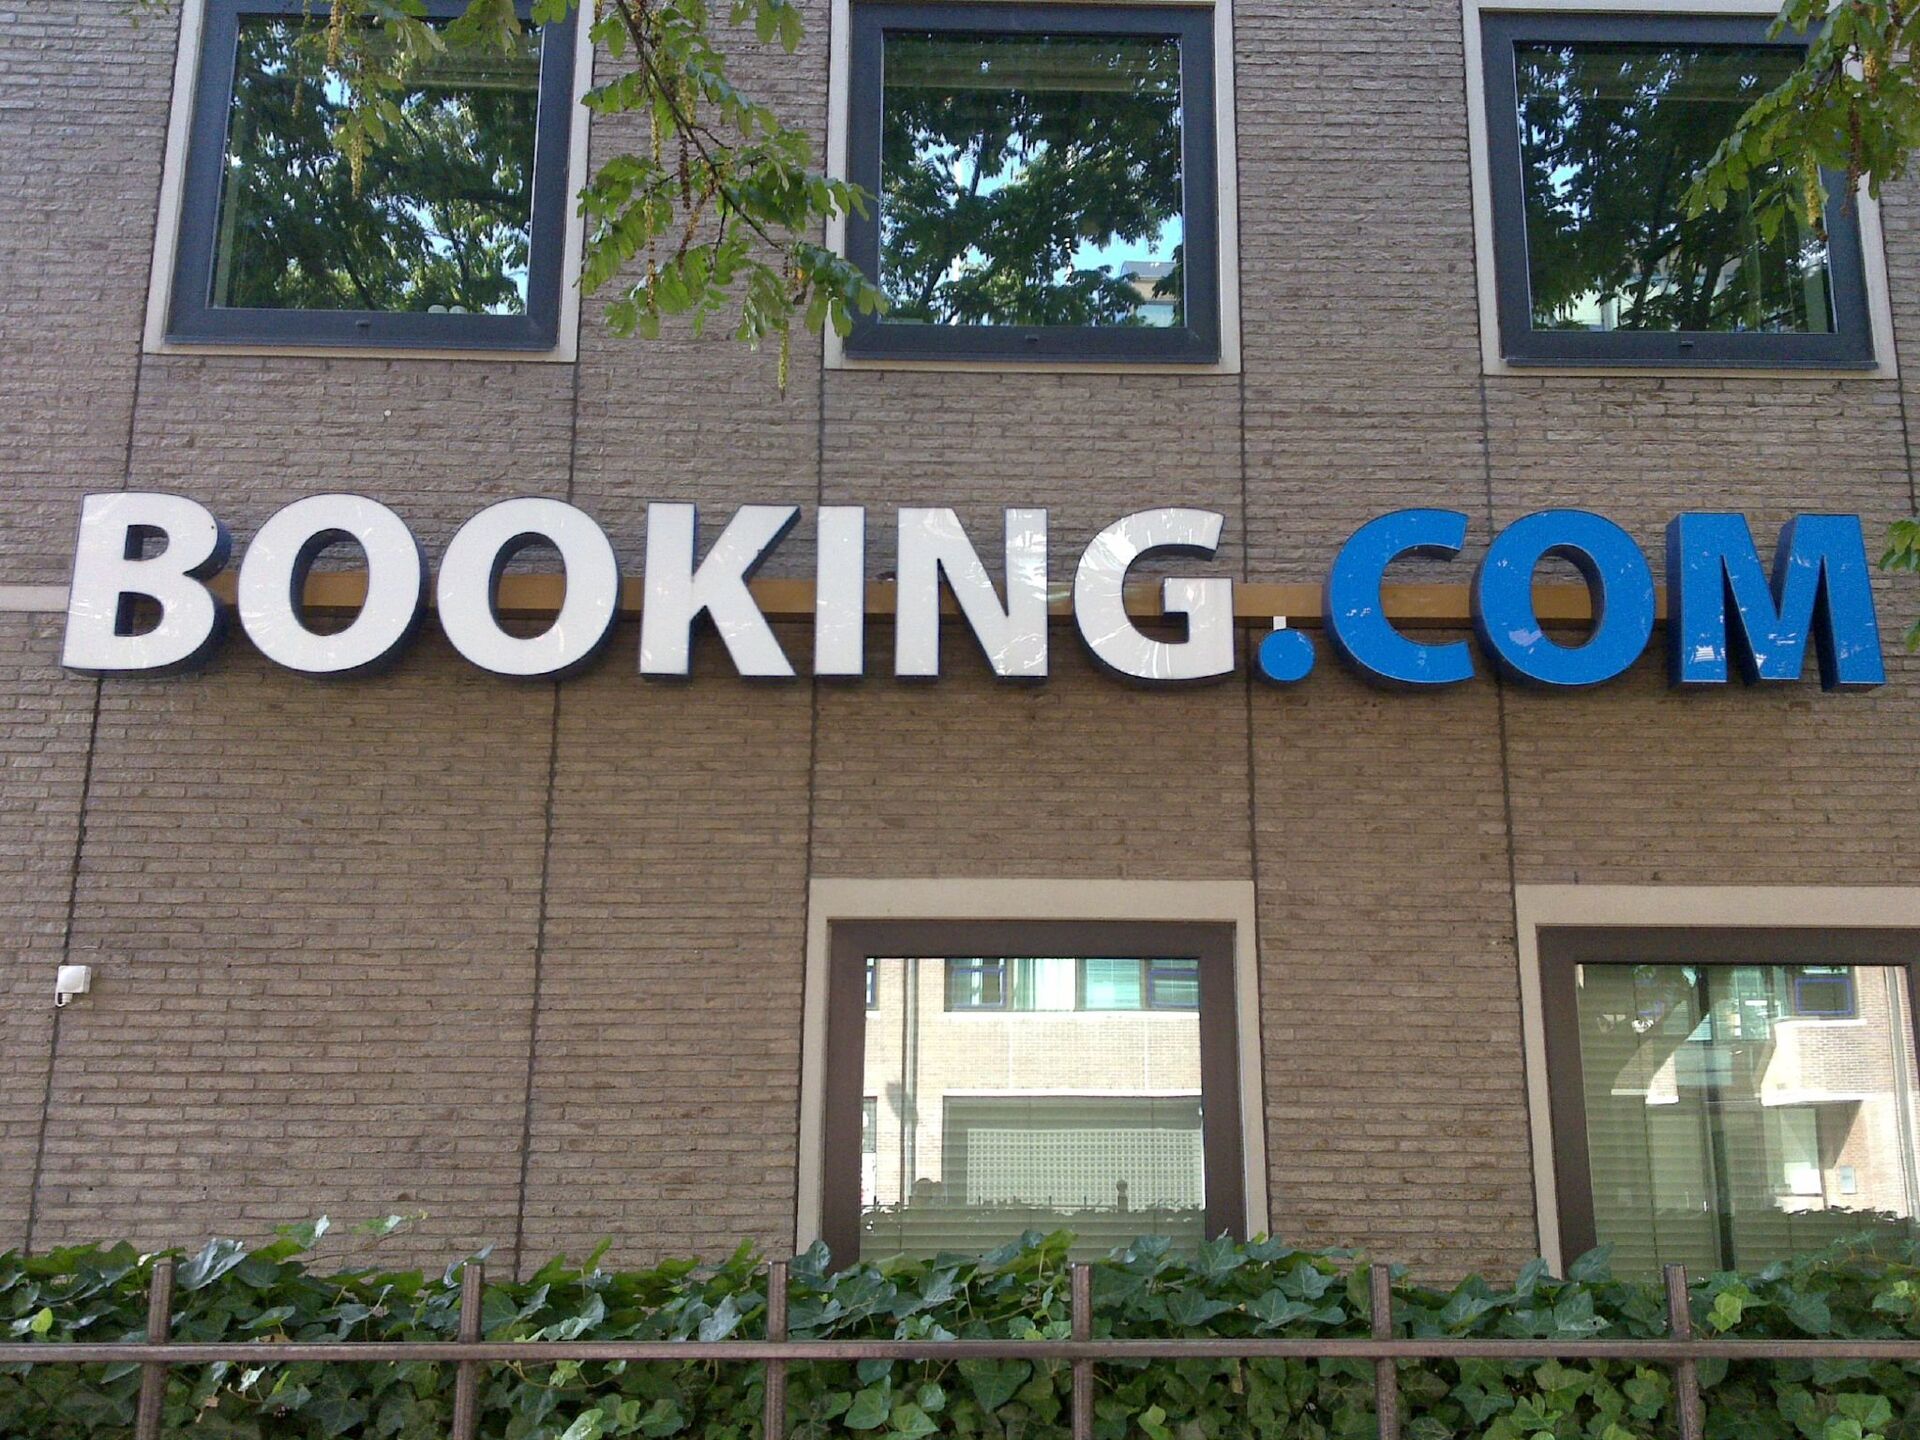 Booking.com The Ultimate Online Booking Platform